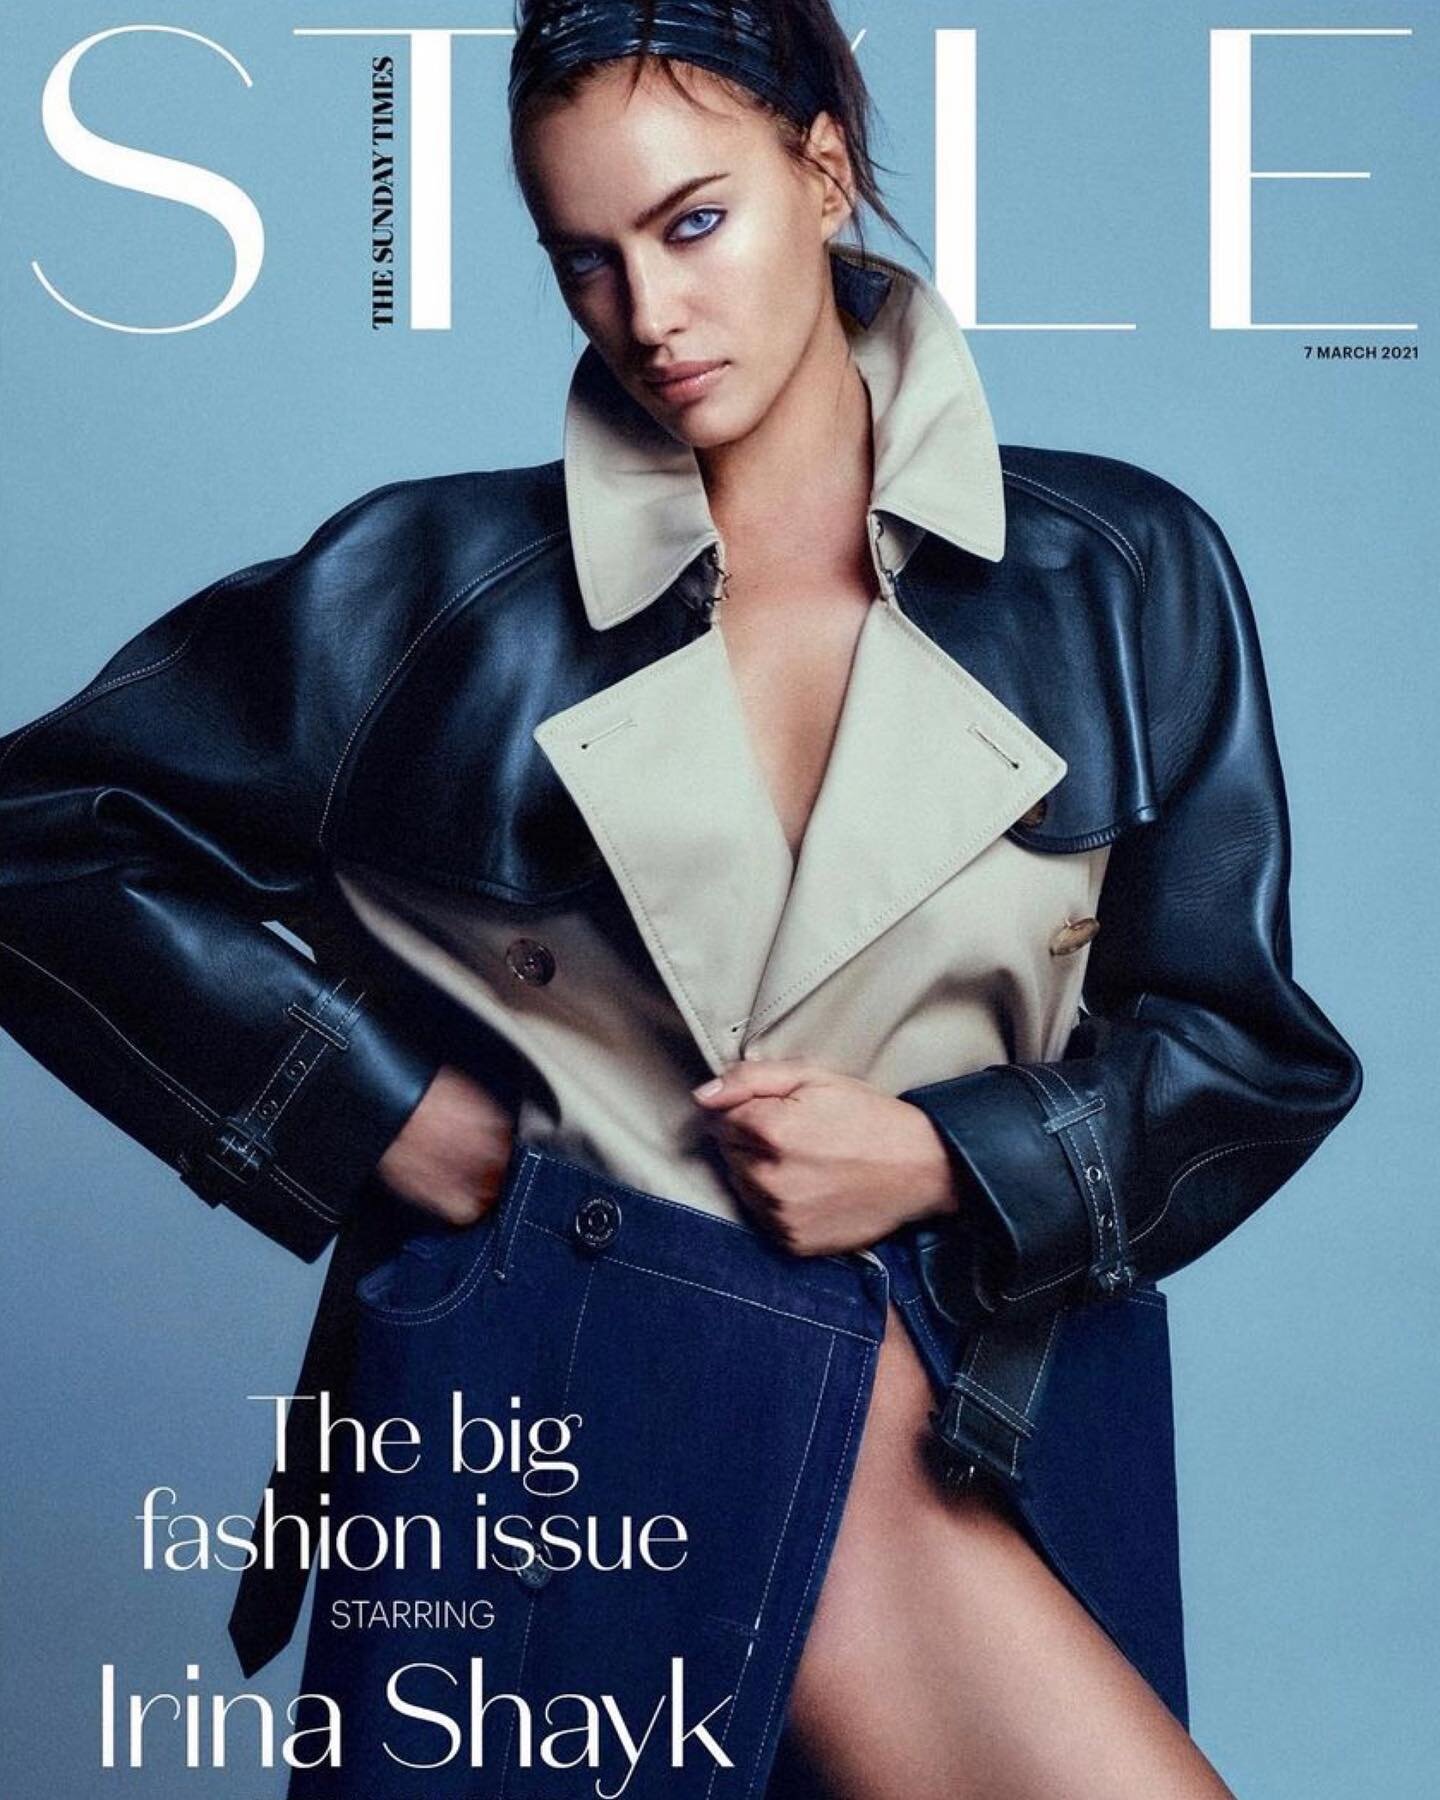 🔹🔹🔹 @irinashayk 🔹🔹🔹 in @burberry on the Cover of The Sunday Times Style (@TheSTStyle) 📷 Shot by @chriscolls . @serlinassociates 

Style: @CeliaAzoulay 
@TheWallGroup

Hair by me @JacobRozenberg @statementartists 
Using my @harryjoshprotools 

